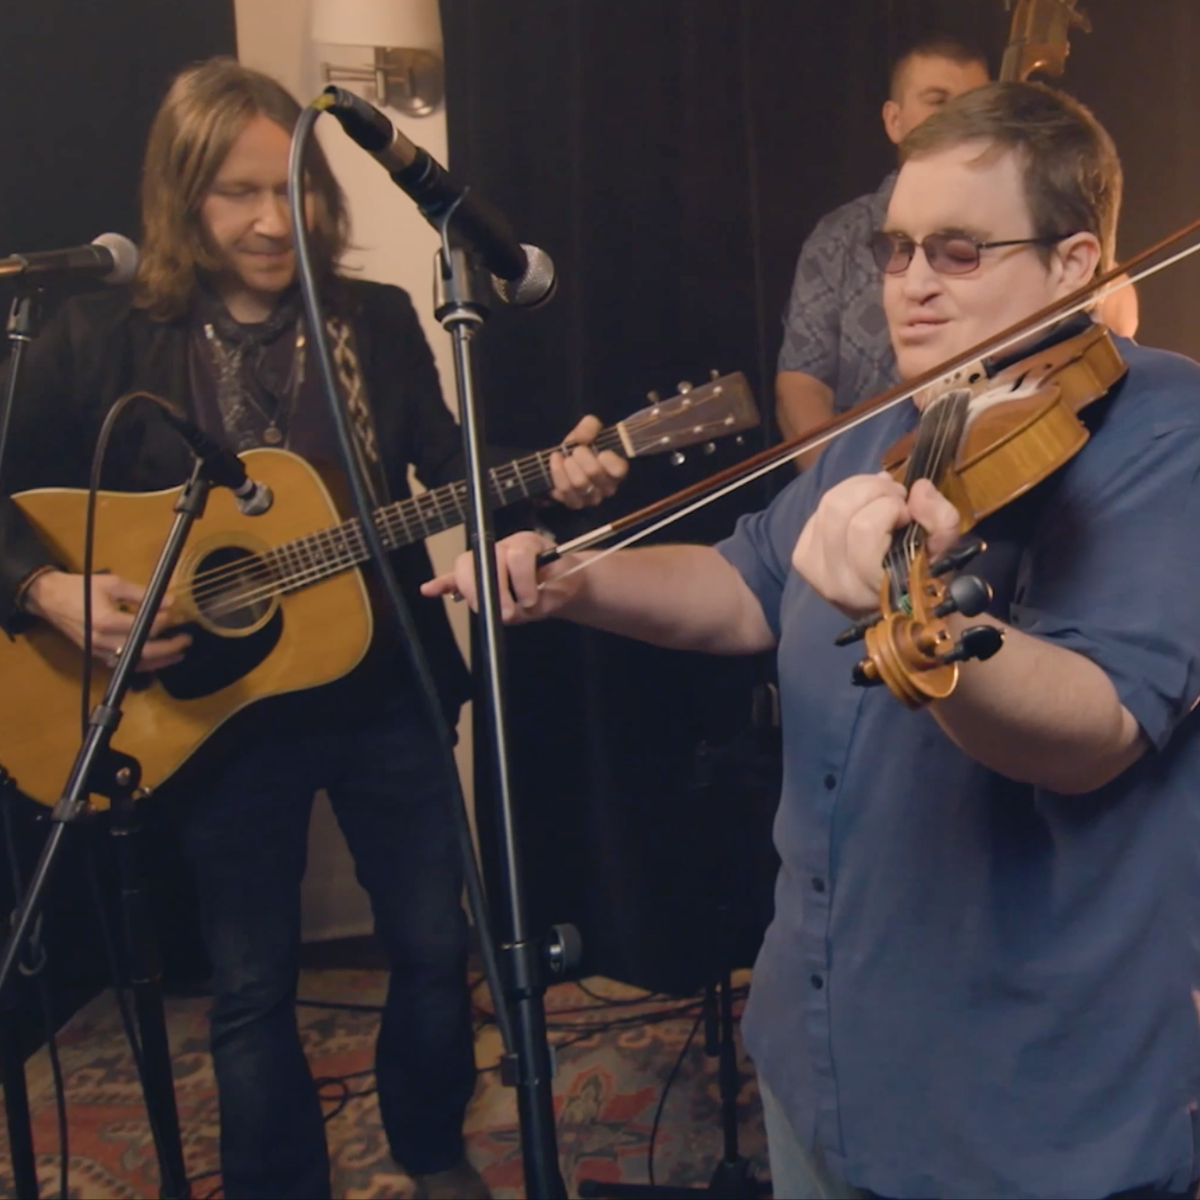 WATCH: The Walcotts, ’Should've Been Me’